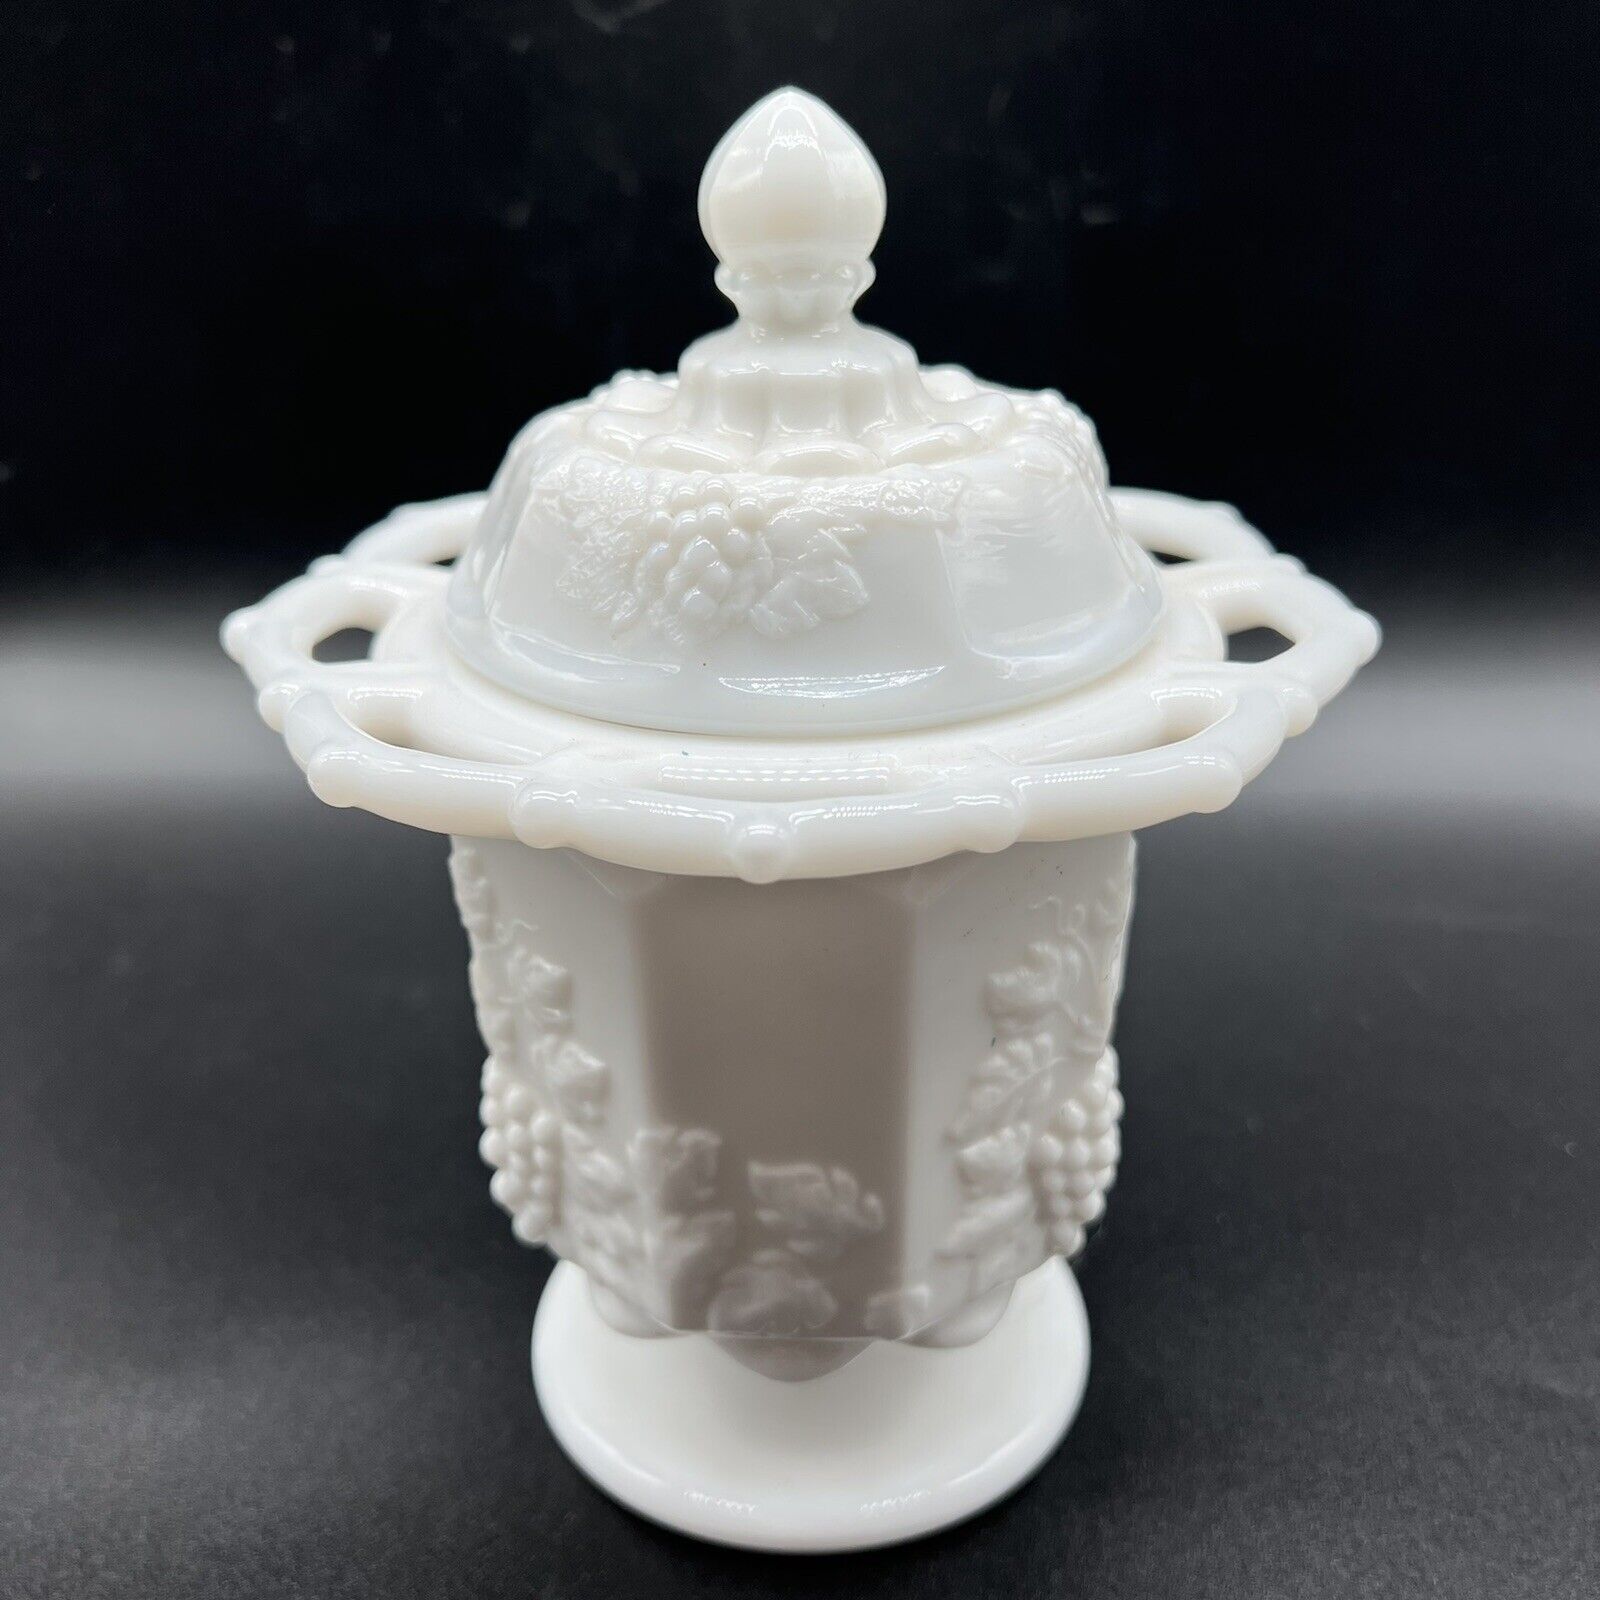 Westmore Paneled Open Lace Grape Milk Glass Footed Compote Candy Dish